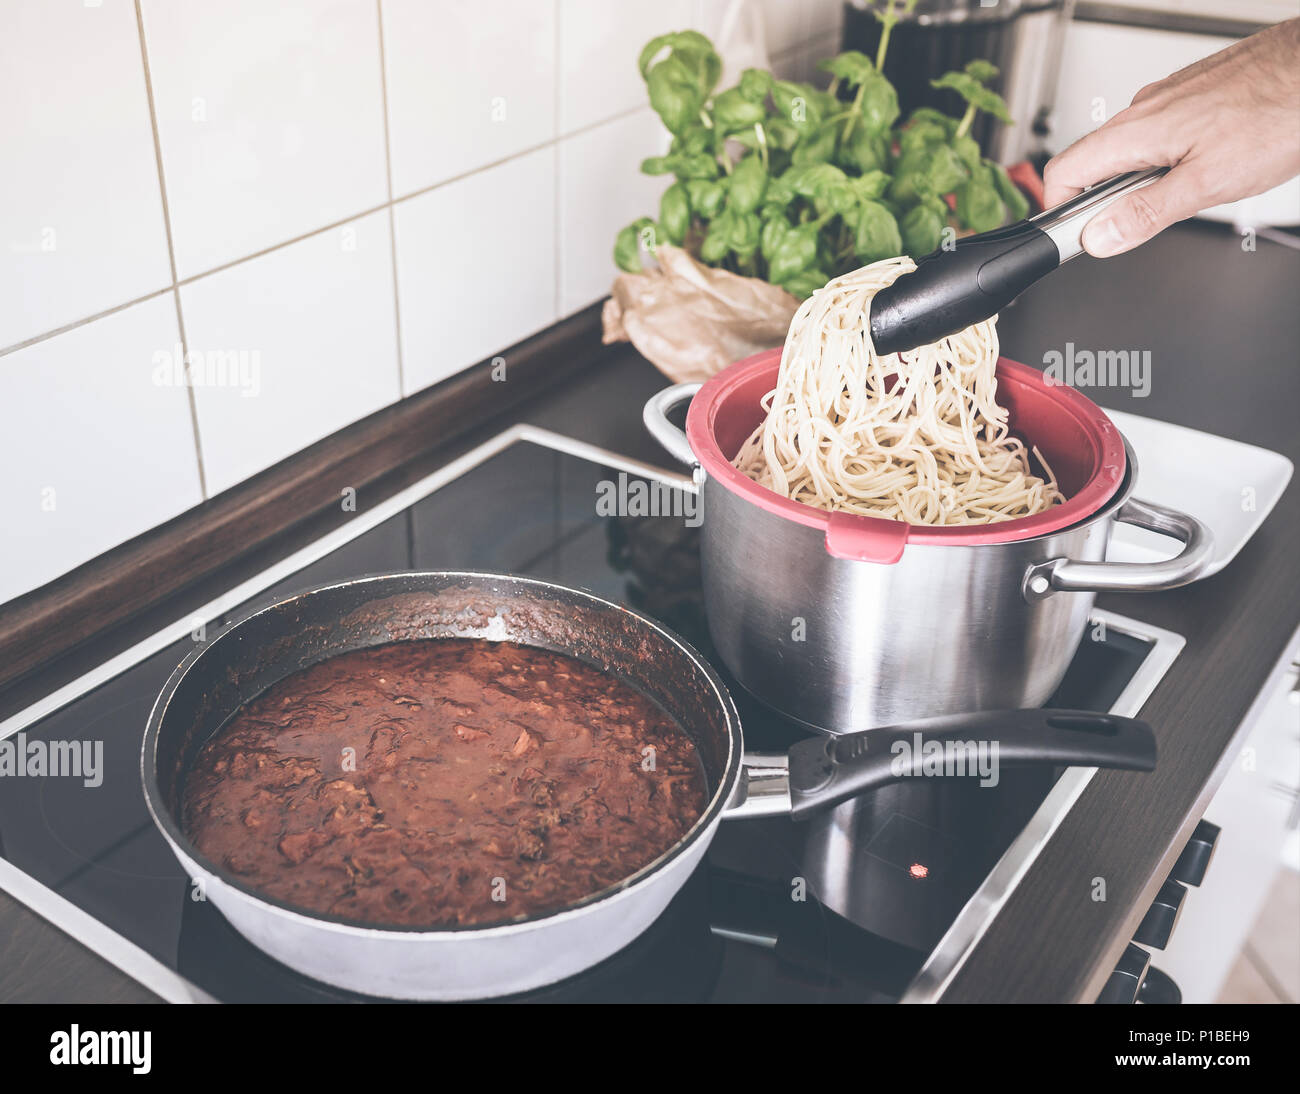 person serving pasta and bolognese sauce on stove Stock Photo